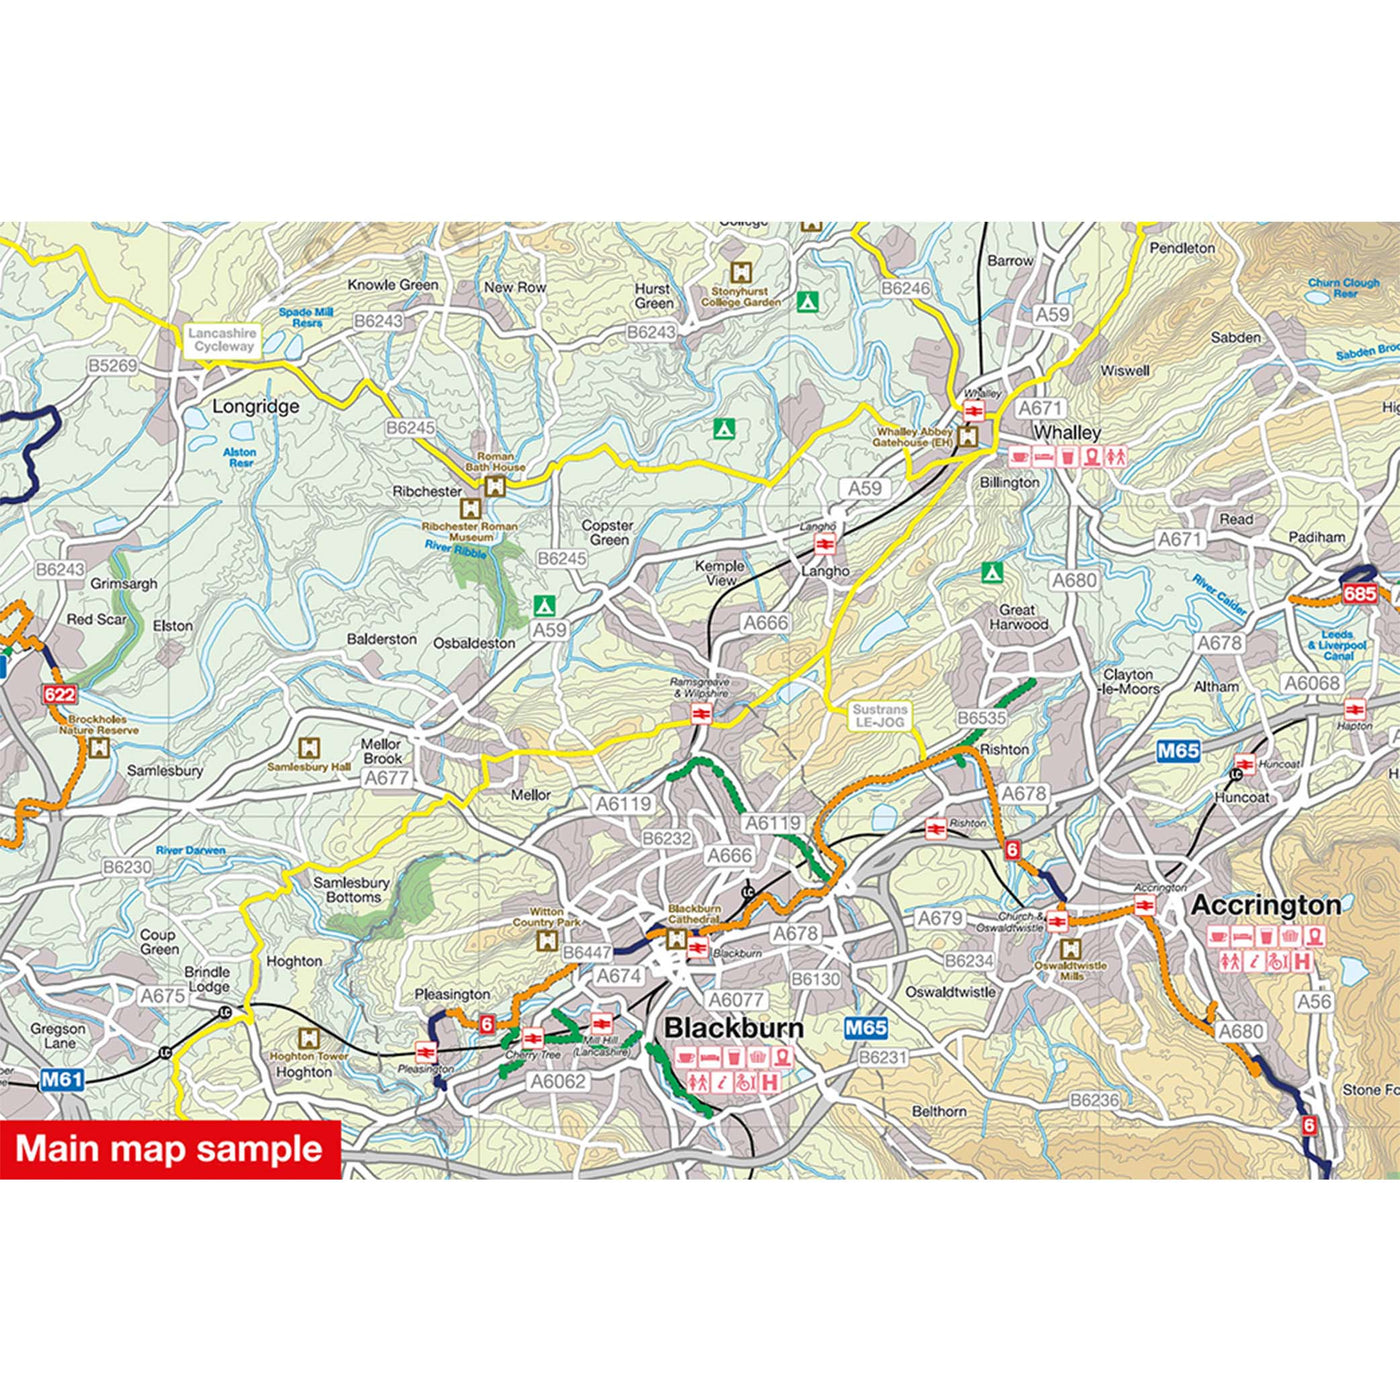 Main map sample of the Lancashire cycle map